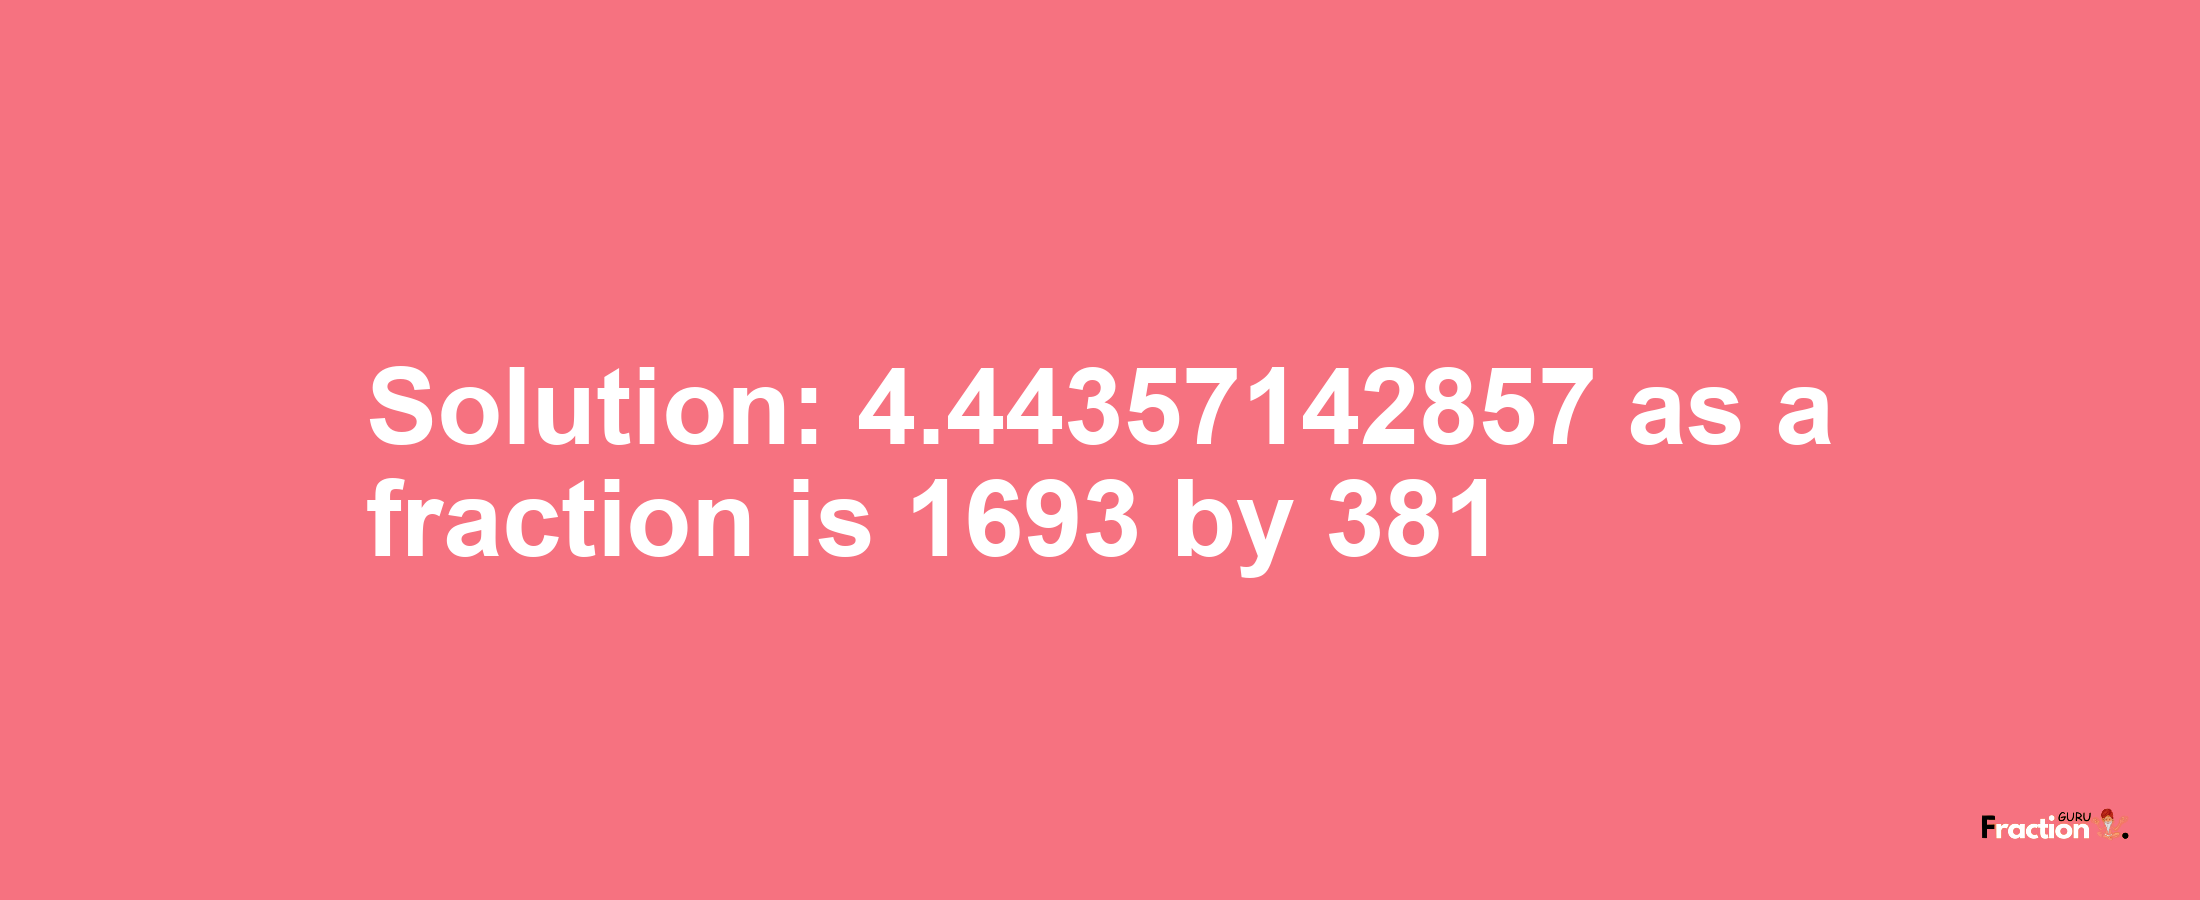 Solution:4.44357142857 as a fraction is 1693/381